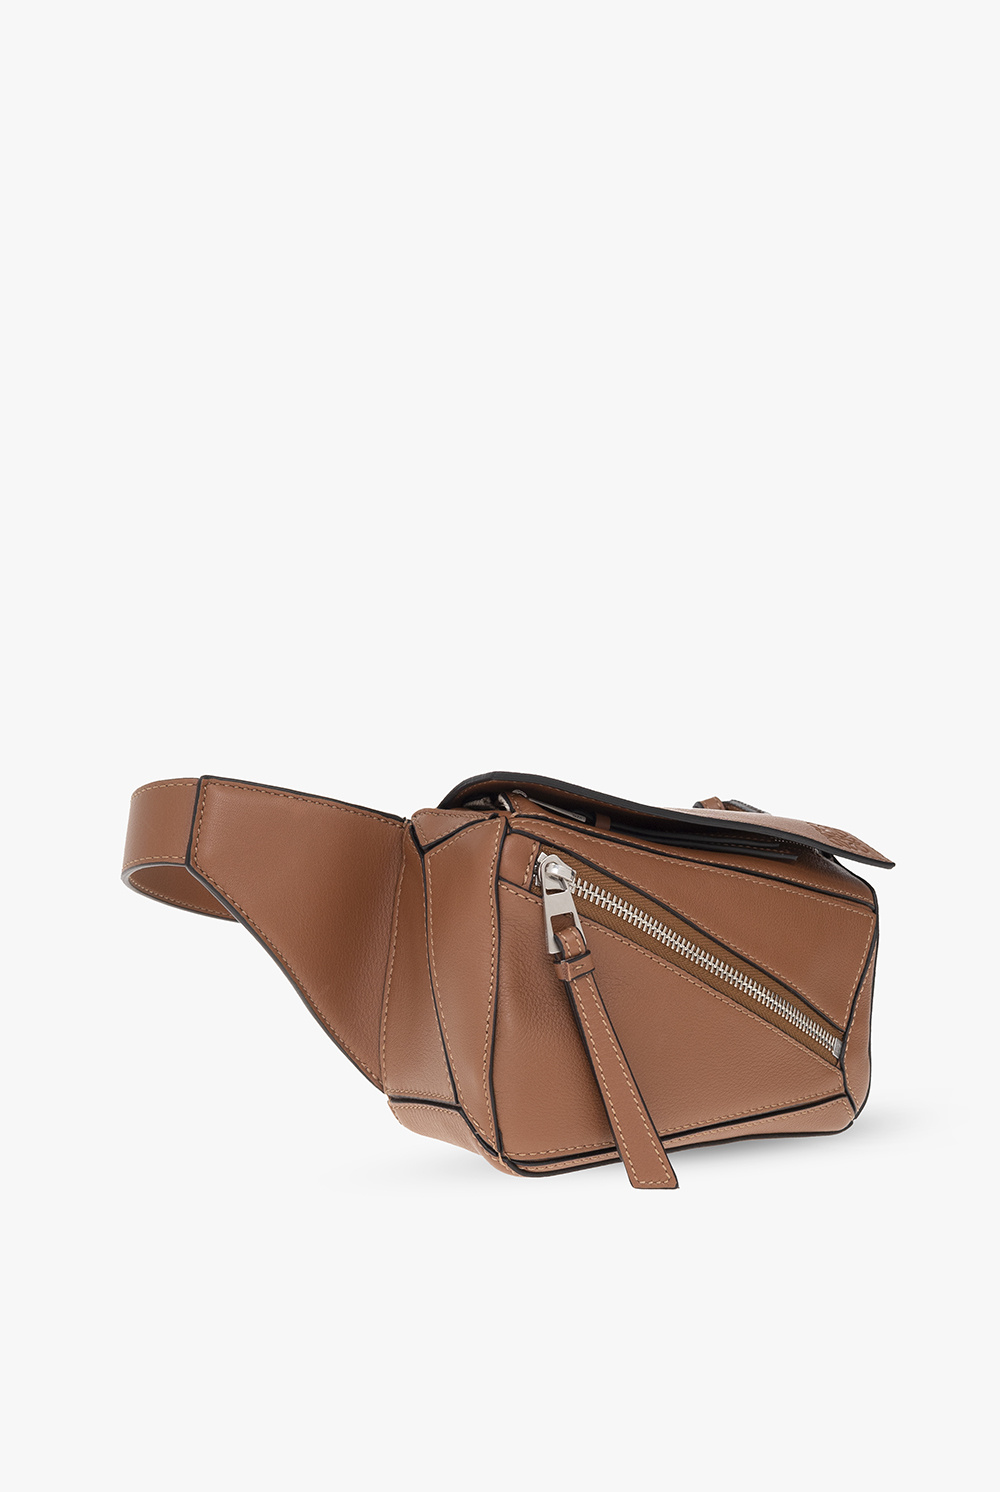 Loewe Puzzle Small Leather Belt Bag